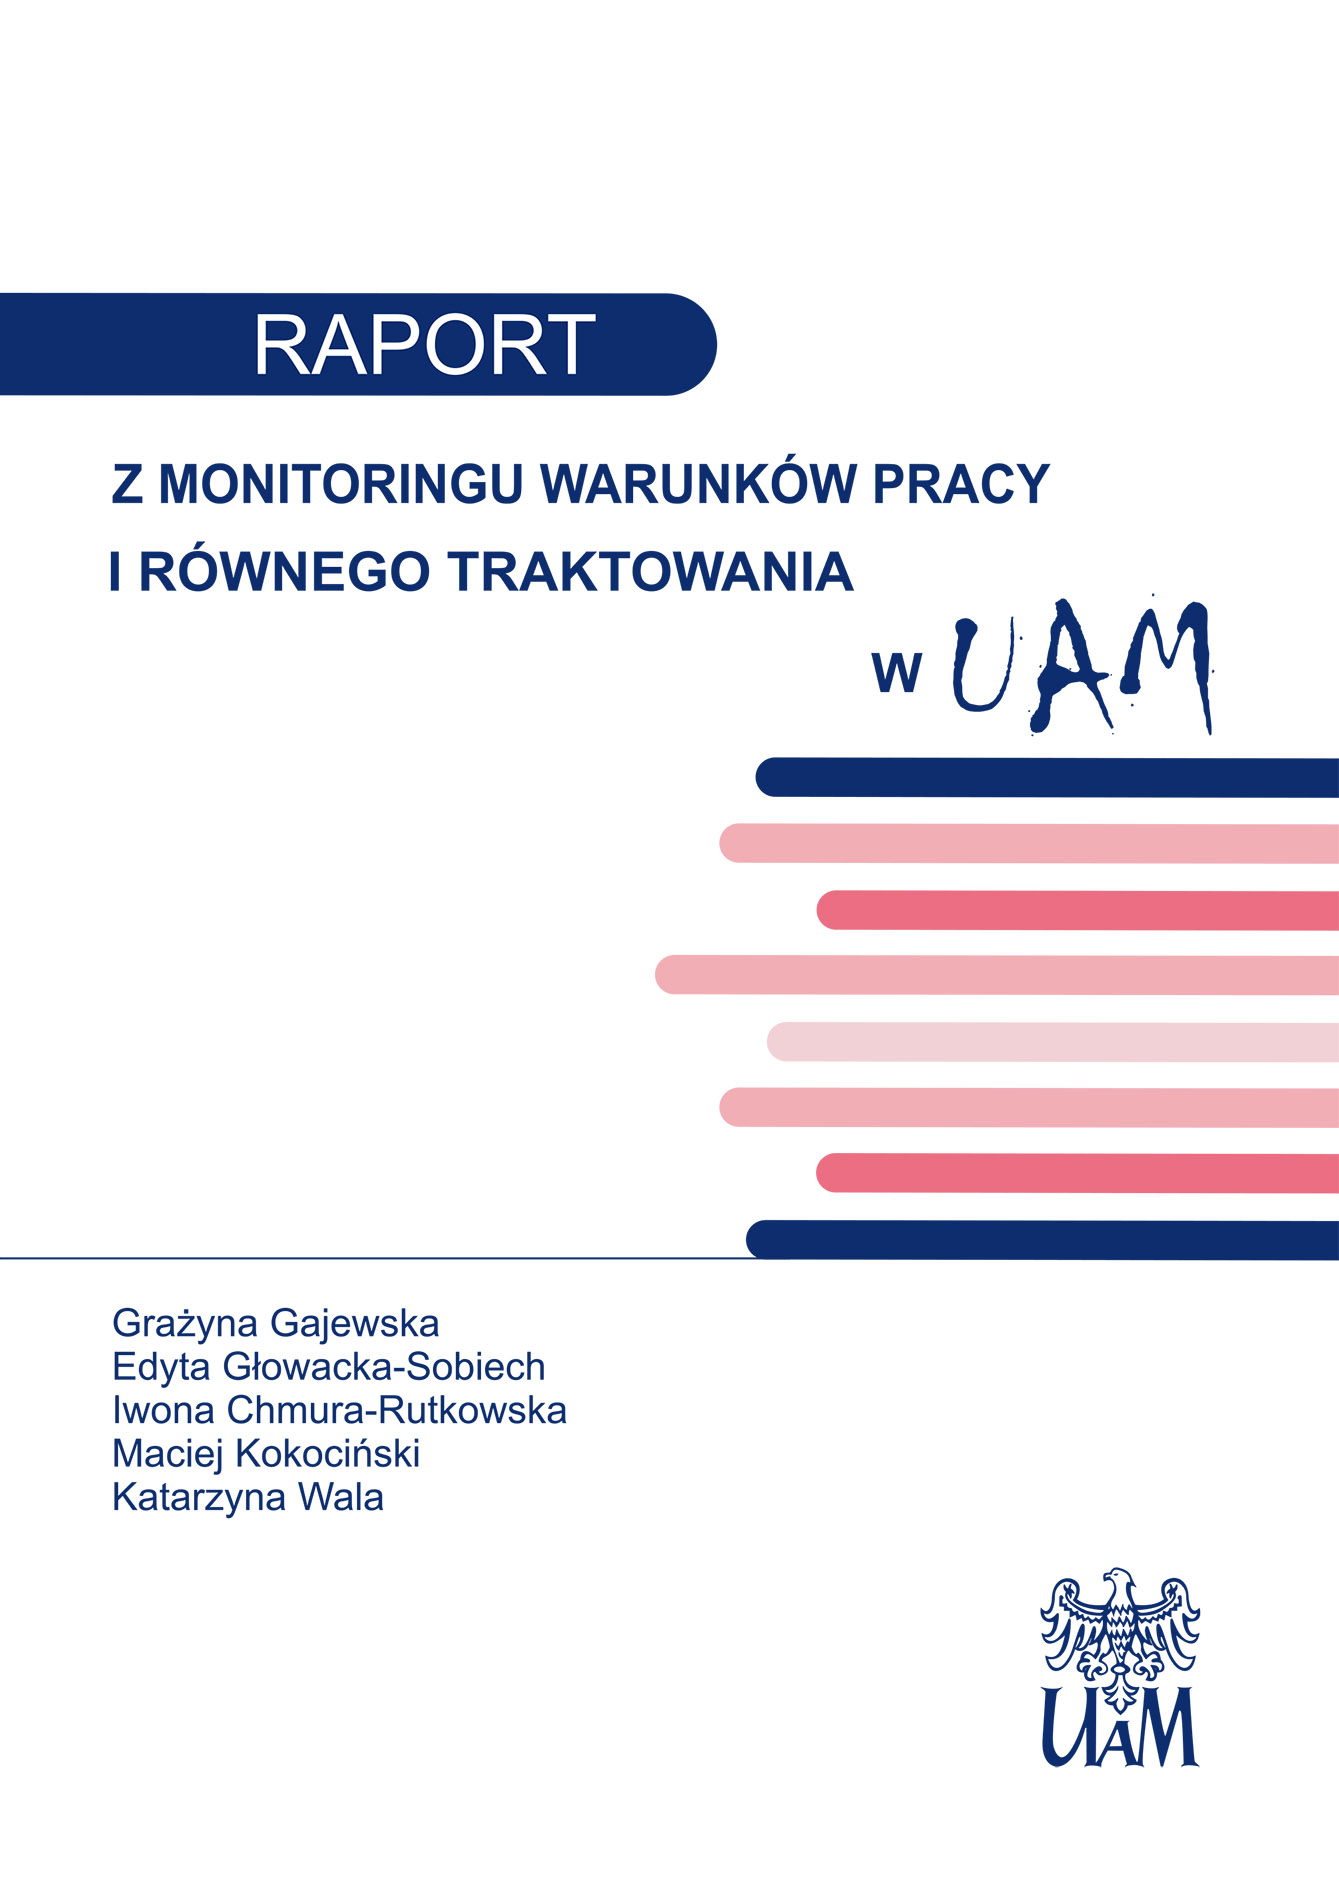 REPORT on monitoring working conditions and equal treatment at Adam Mickiewicz University